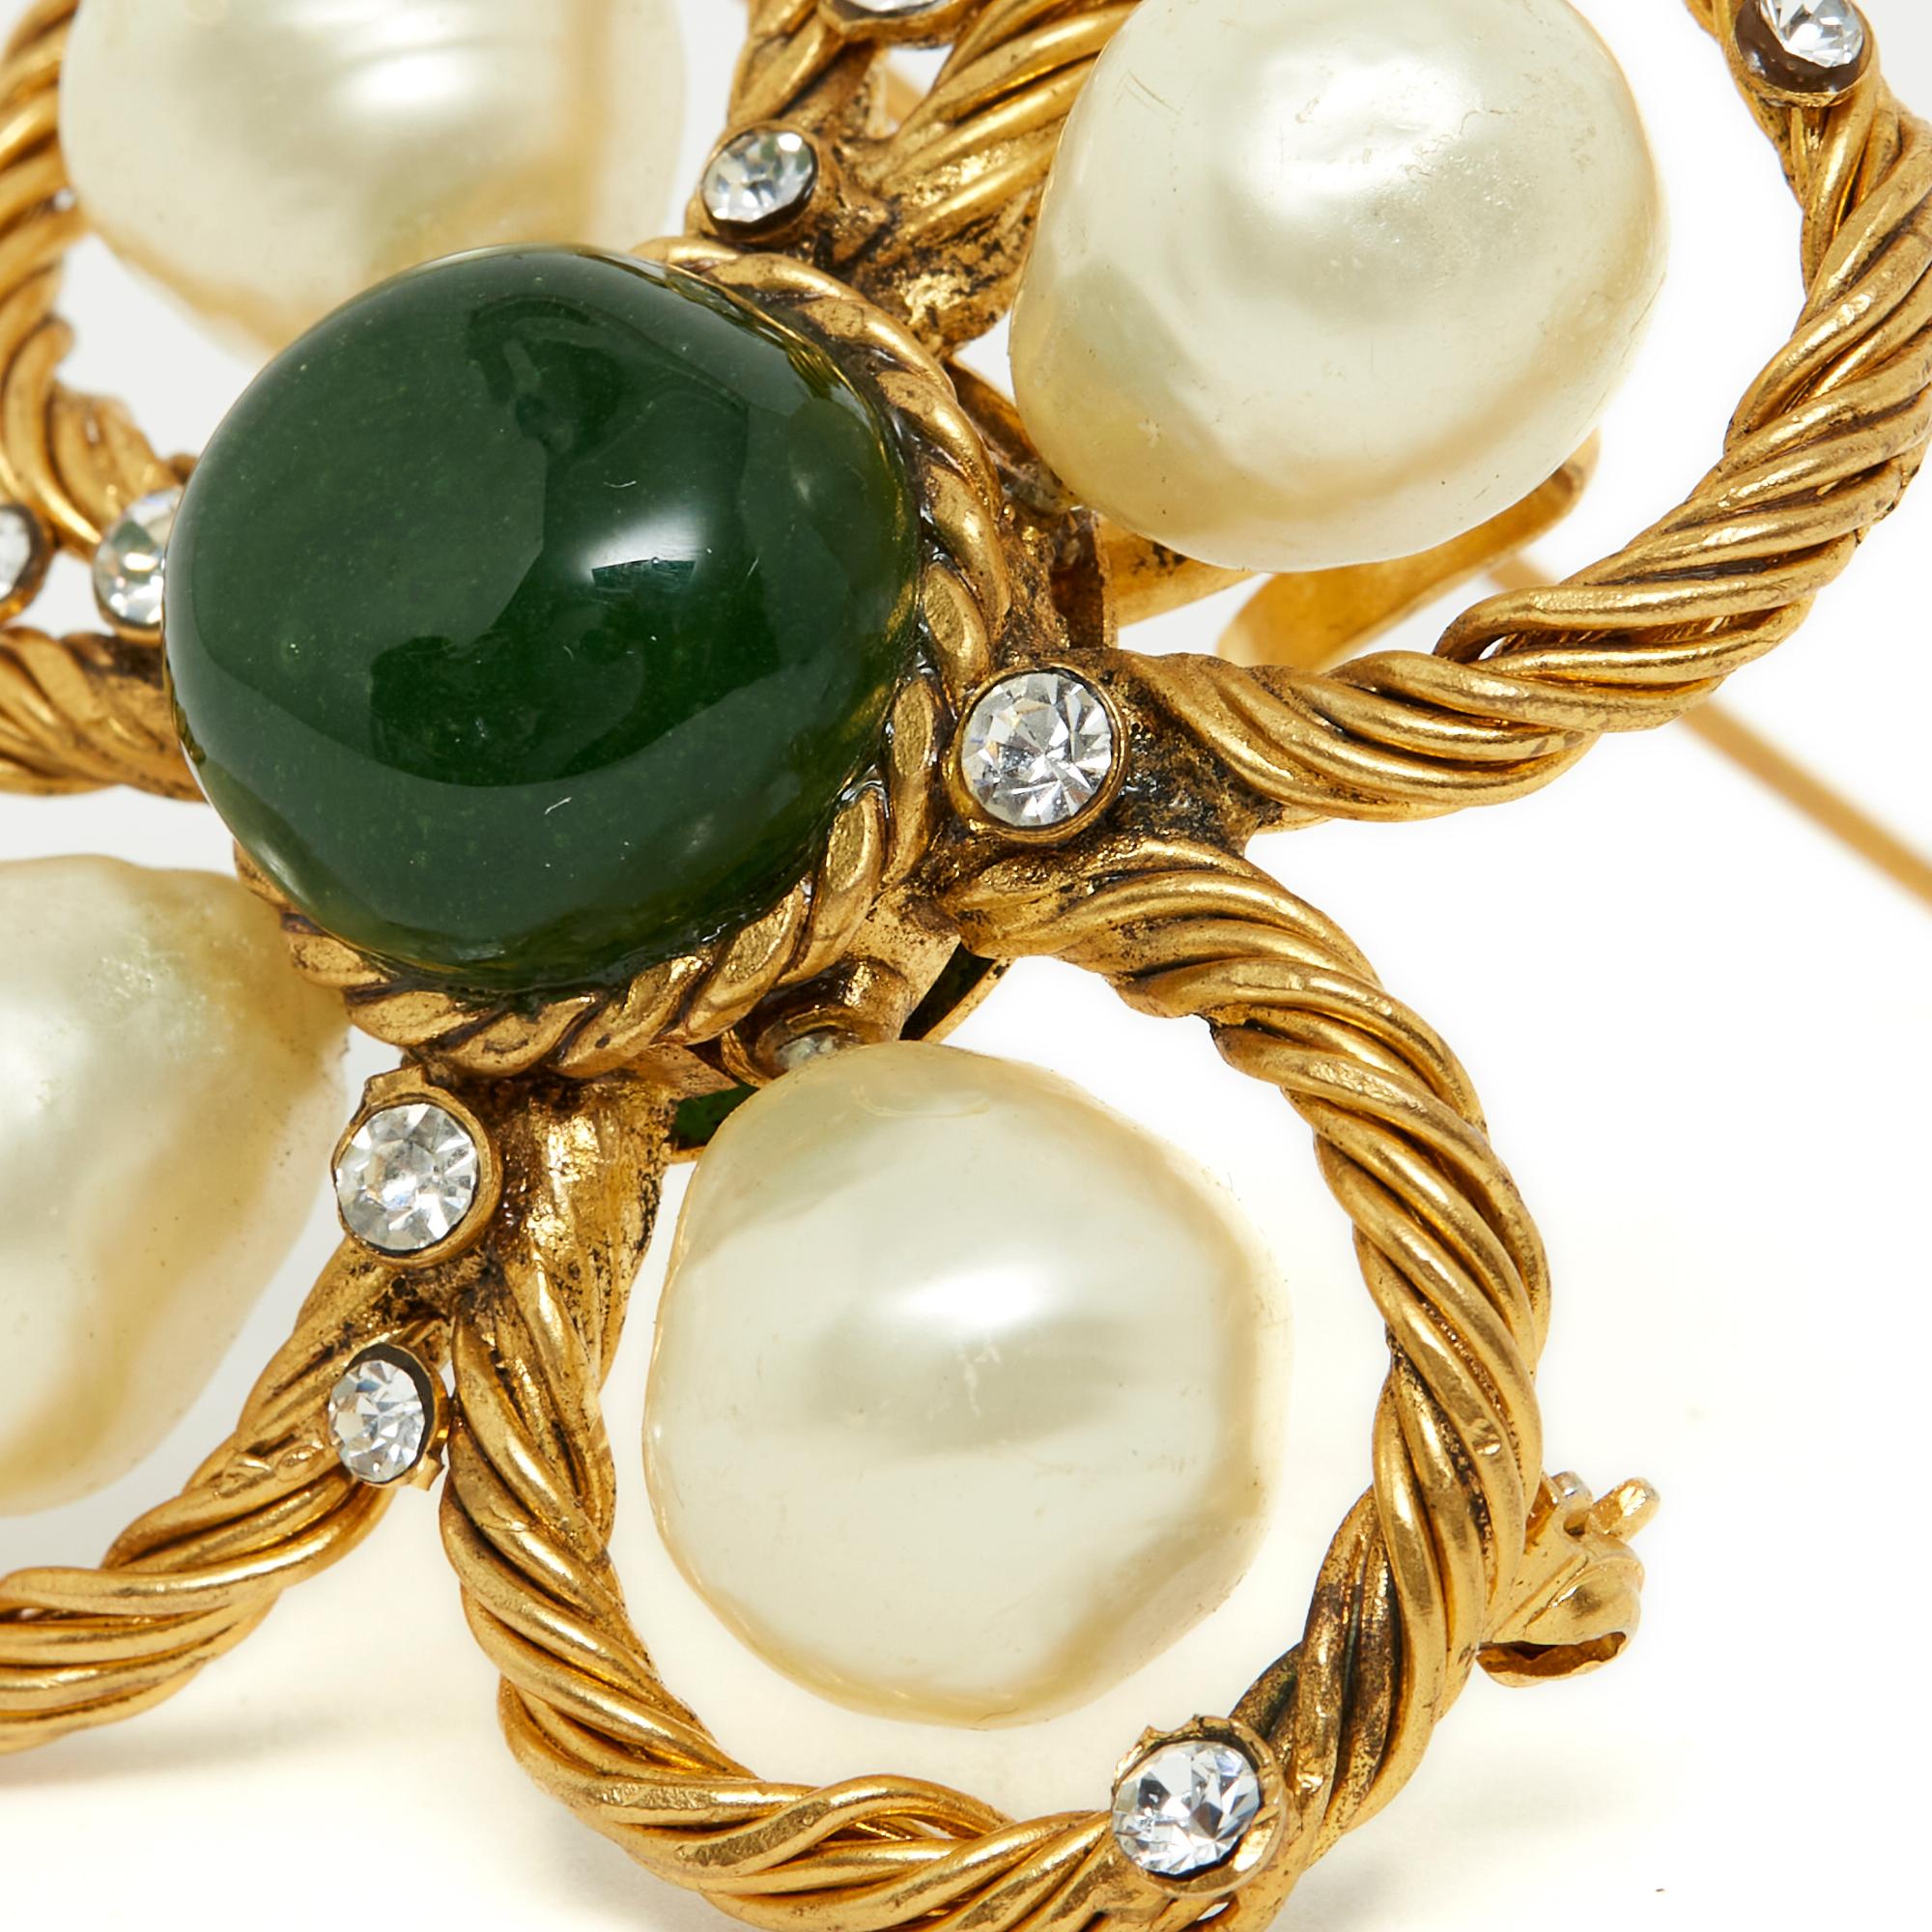 Chanel Haute Couture brooch by Gripoix, probably circa 1995 in gilded metal, irregular pearly glass beads, white rhinestones and green glass cabochon, equipped with a brooch pin and a bail to be suspended from a necklace, a neckline, ... width 6cm x